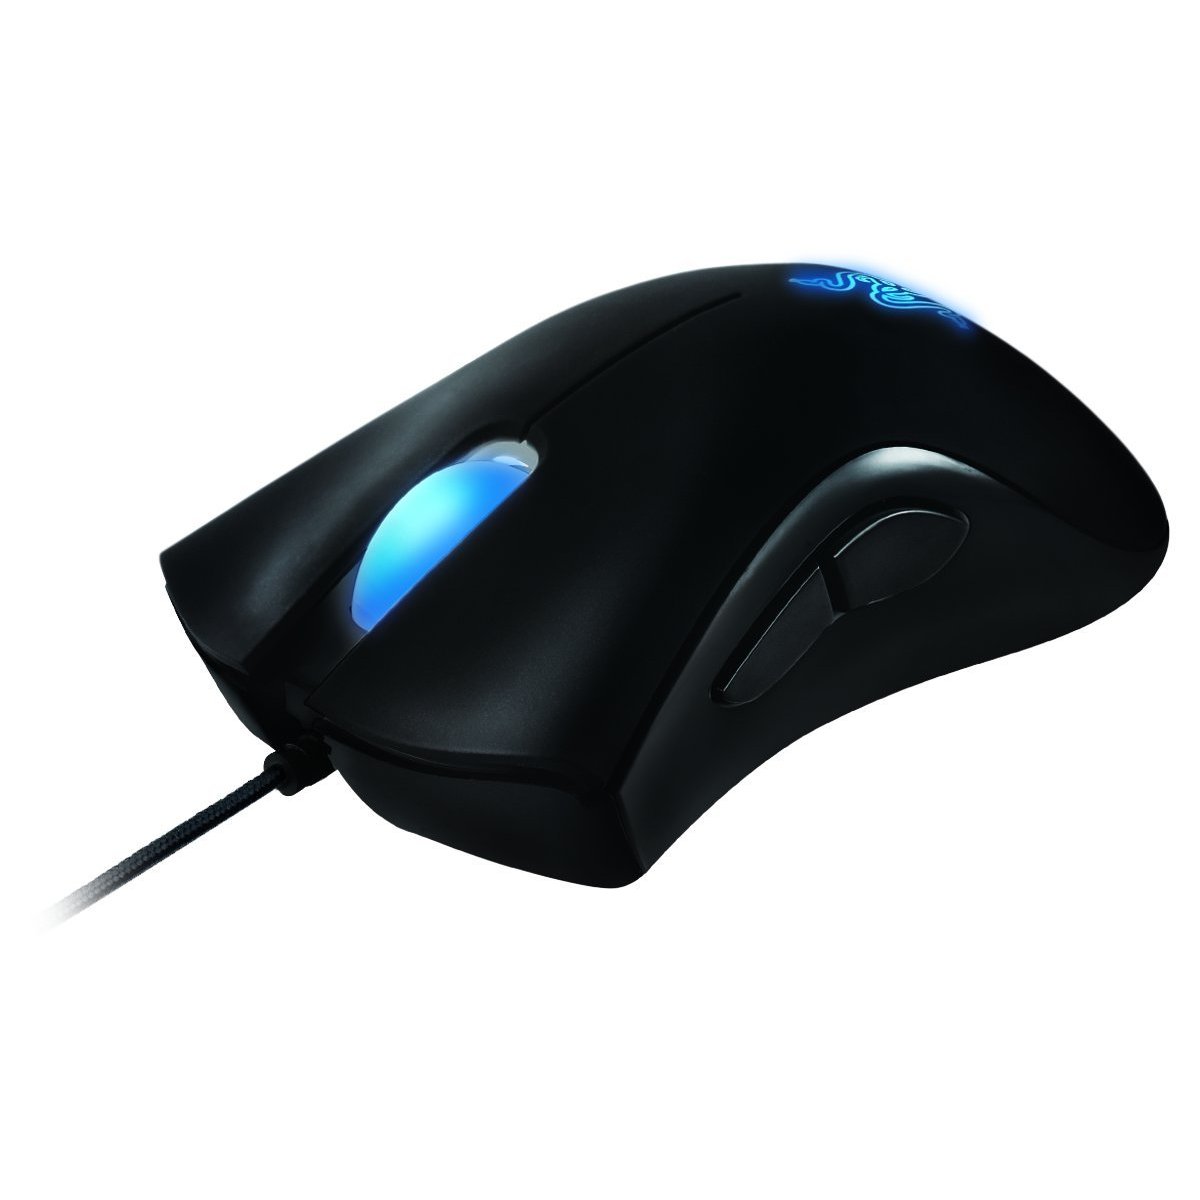 http://thetechjournal.com/wp-content/uploads/images/1111/1321032062-razer-deathadder-3500-high-precision-35g-infrared-gaming-mouse-8.jpg